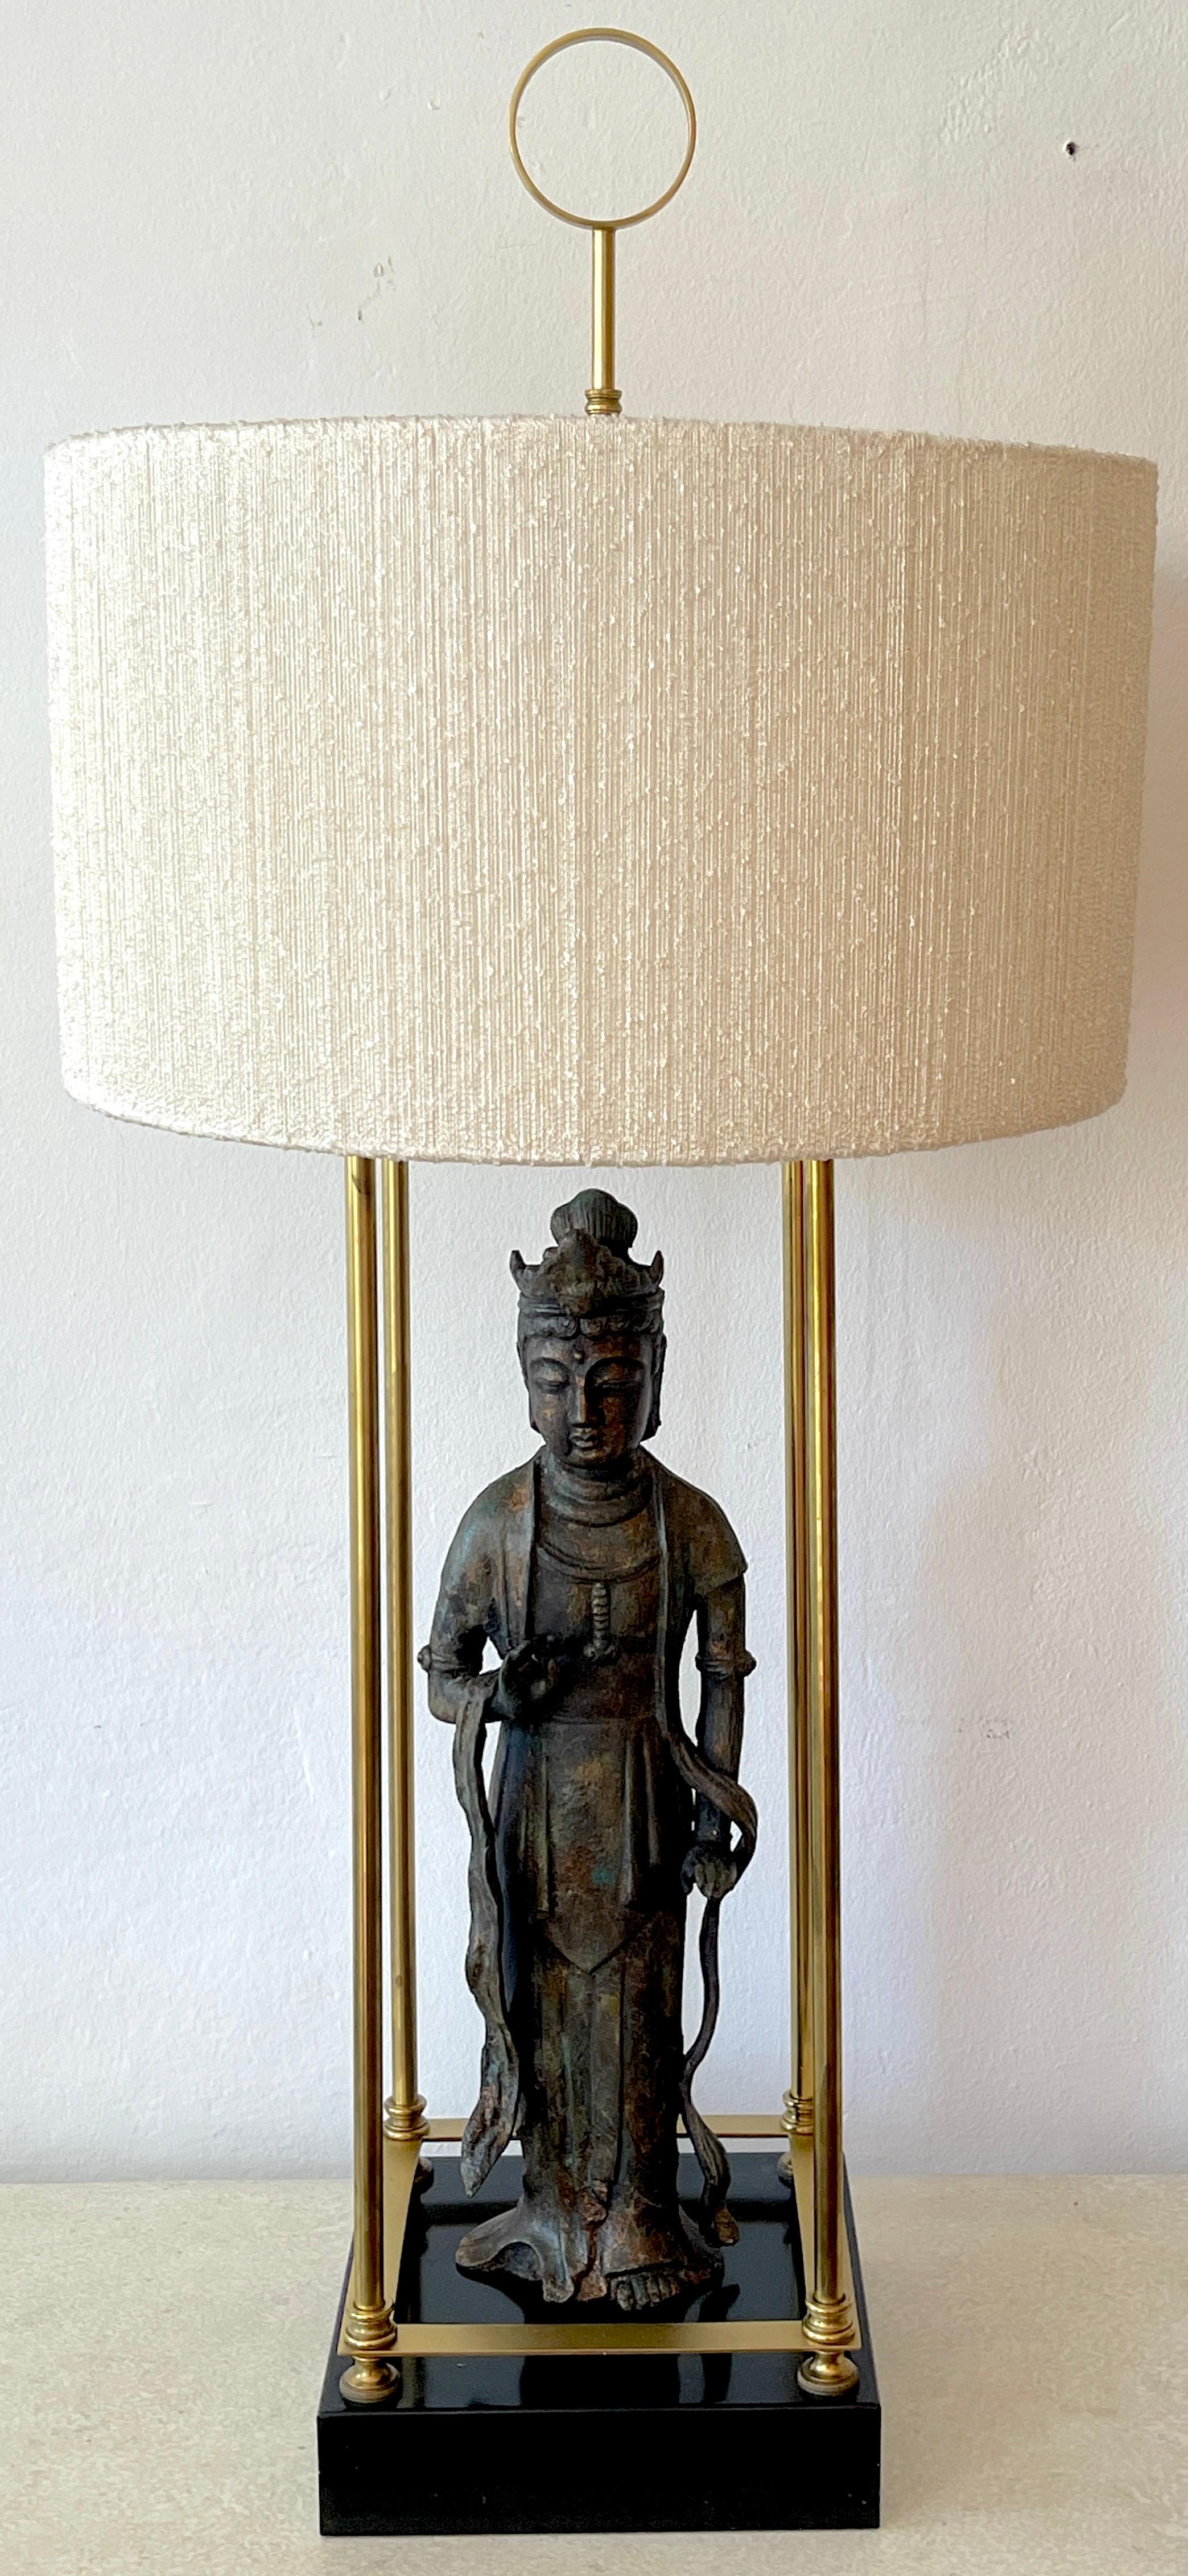 Modern bronze standing figure of guanyn lamp, Attributed to Billy Haines, The patinated bronze figure of Guanyn, within a polished brass trellis, raised on a 9.5